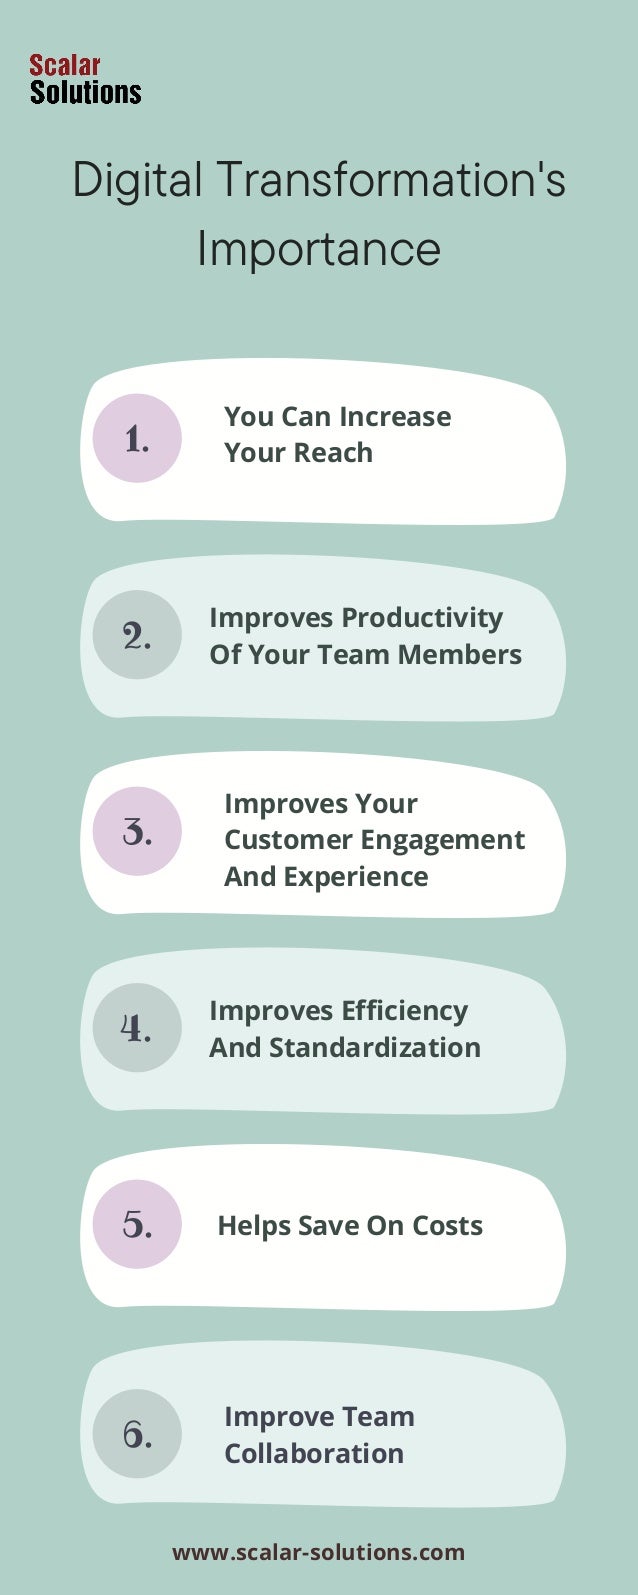 Digital Transformation's
Importance
1.
2.
3.
4.
5.
6.
You Can Increase
Your Reach
Improves Productivity
Of Your Team Members
Improves Your
Customer Engagement
And Experience
Improves Efficiency
And Standardization
Helps Save On Costs
Improve Team
Collaboration
www.scalar-solutions.com
 